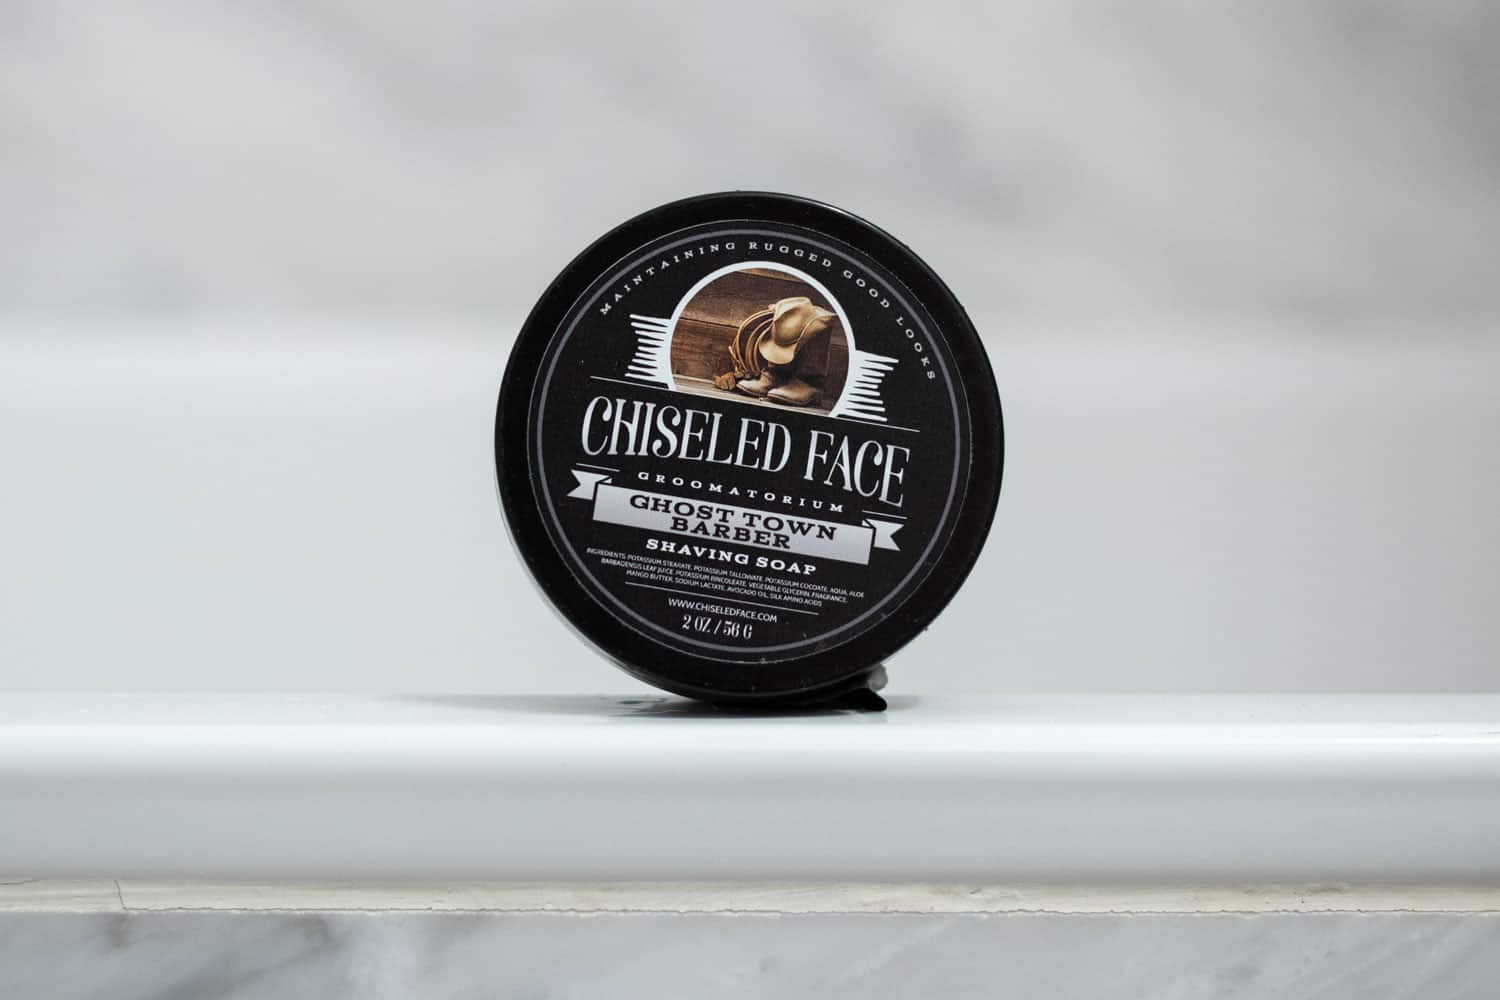 Chiseled Face Ghost Town Barber Shave Soap Review